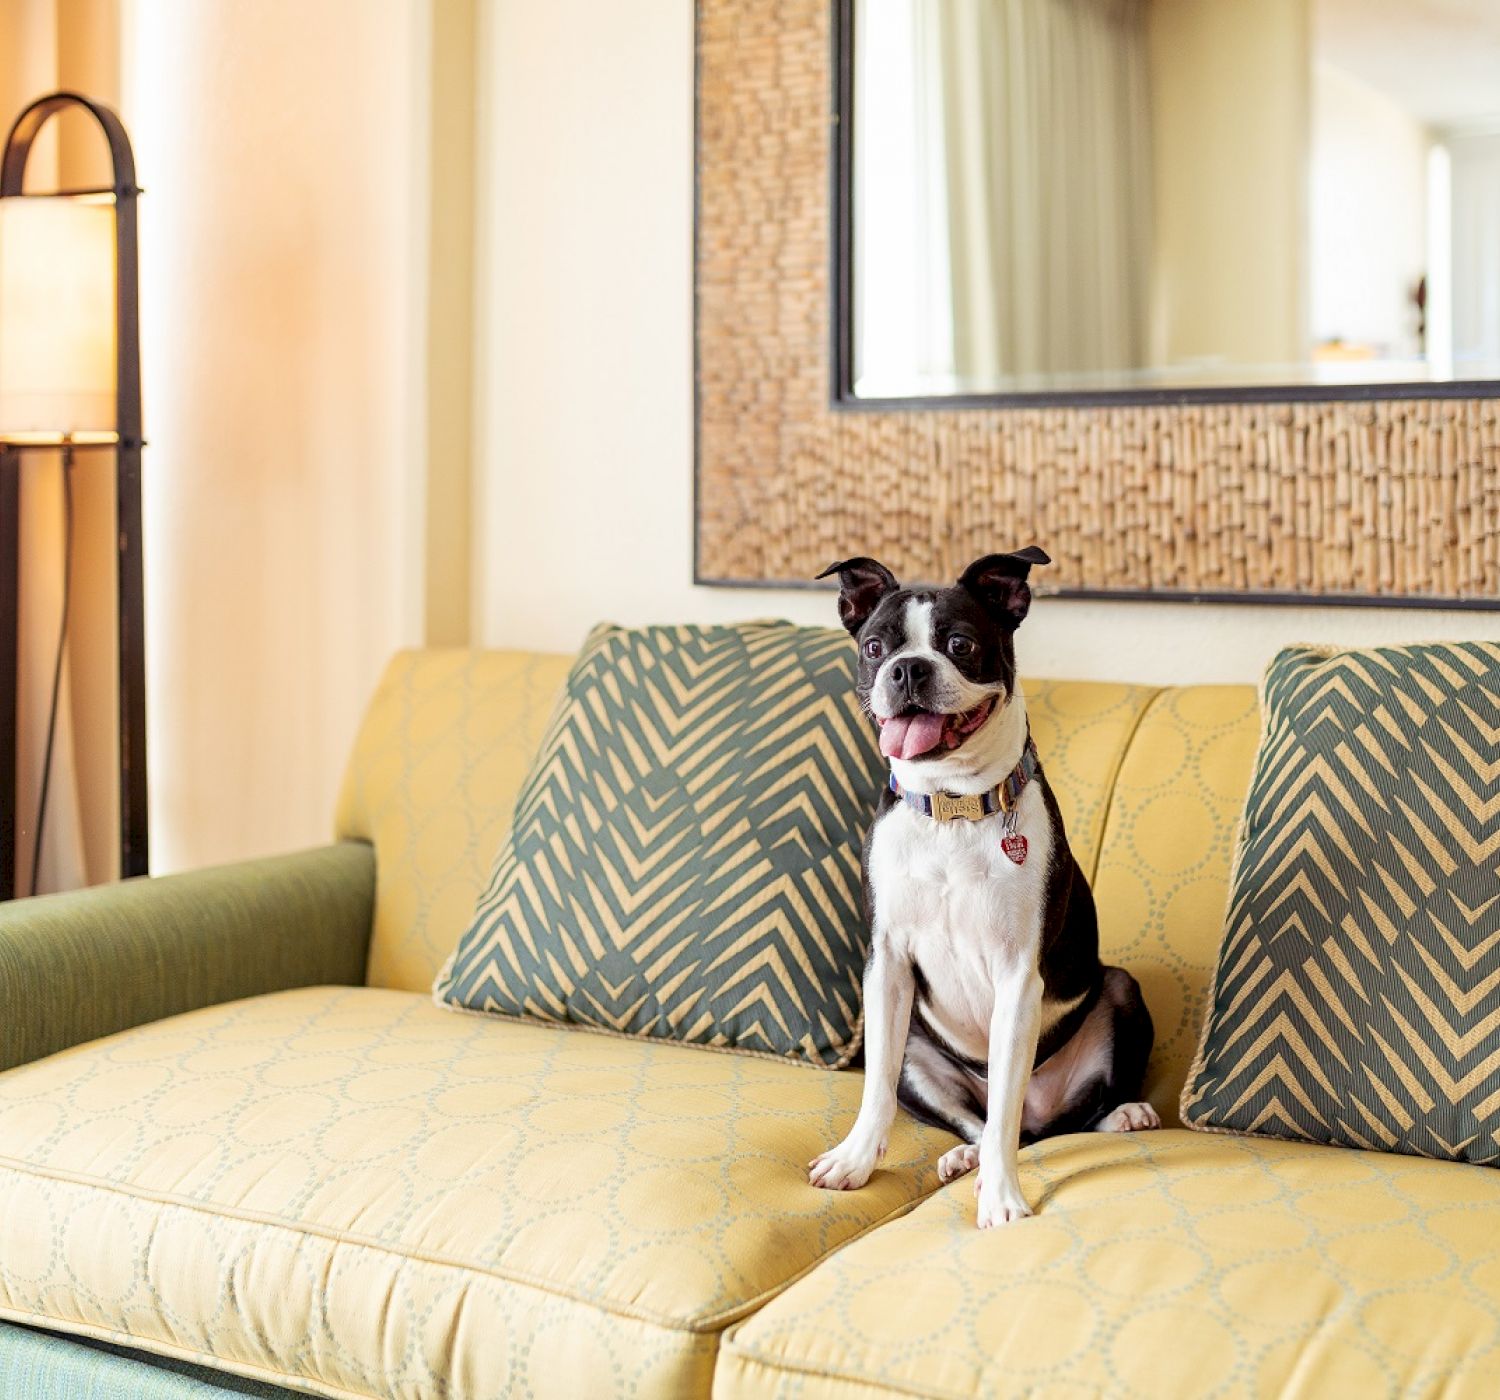 A dog is sitting on a yellow and green couch with patterned cushions, in front of a large wall mirror and next to a standing lamp.